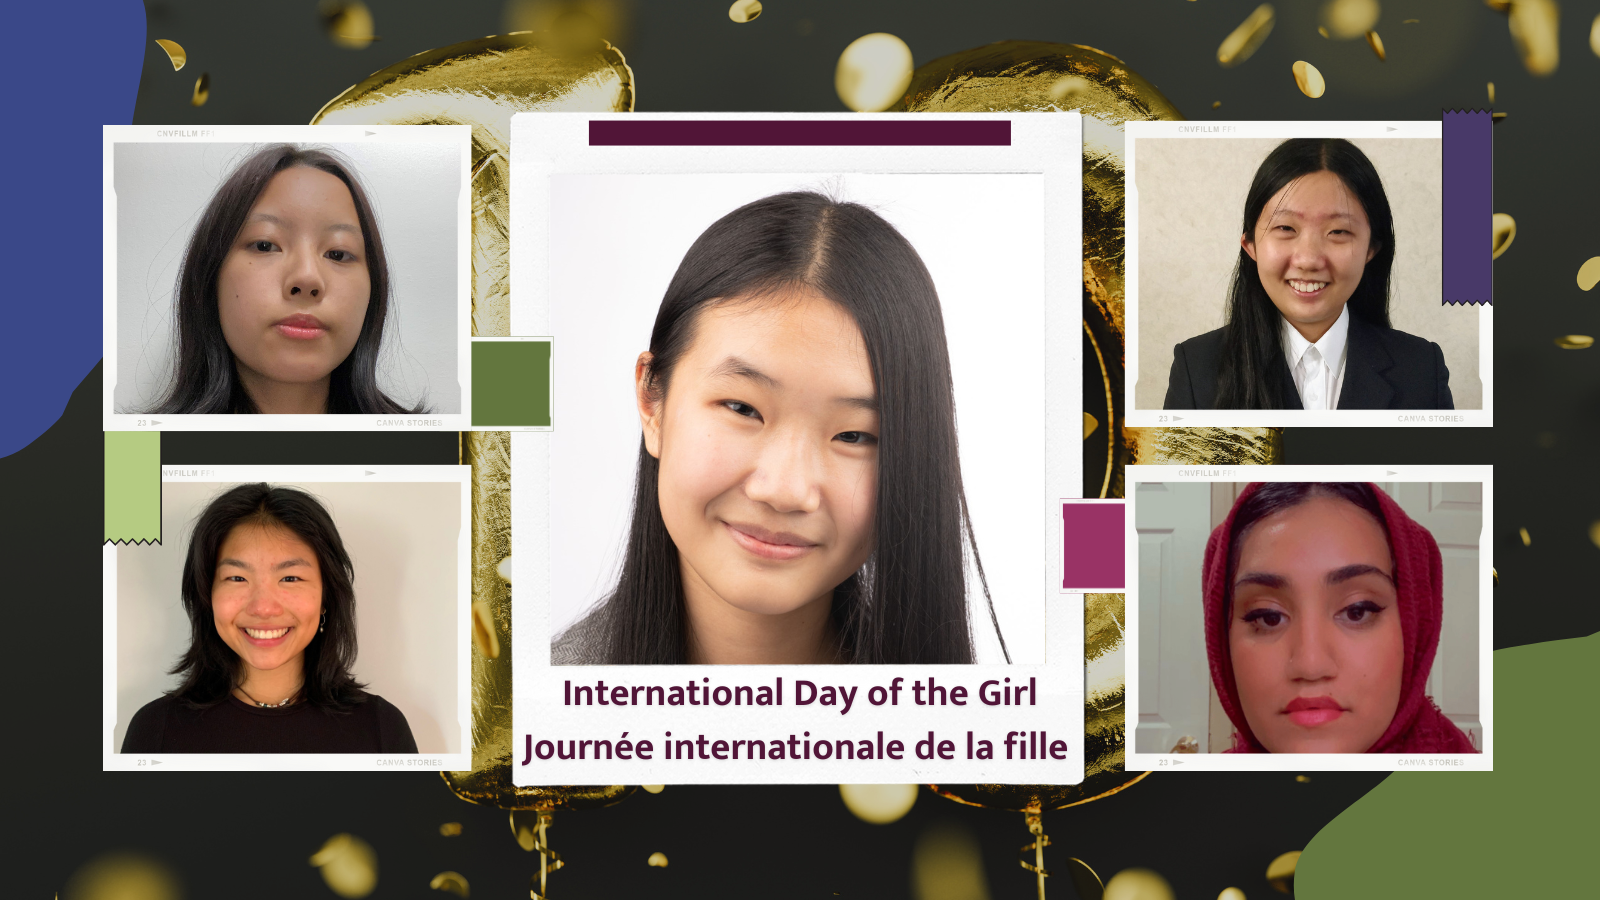 Celebrating 10 years of the International Day of the Girl: Meet the Young Leaders Joining CanWaCH For Girls Belong Here